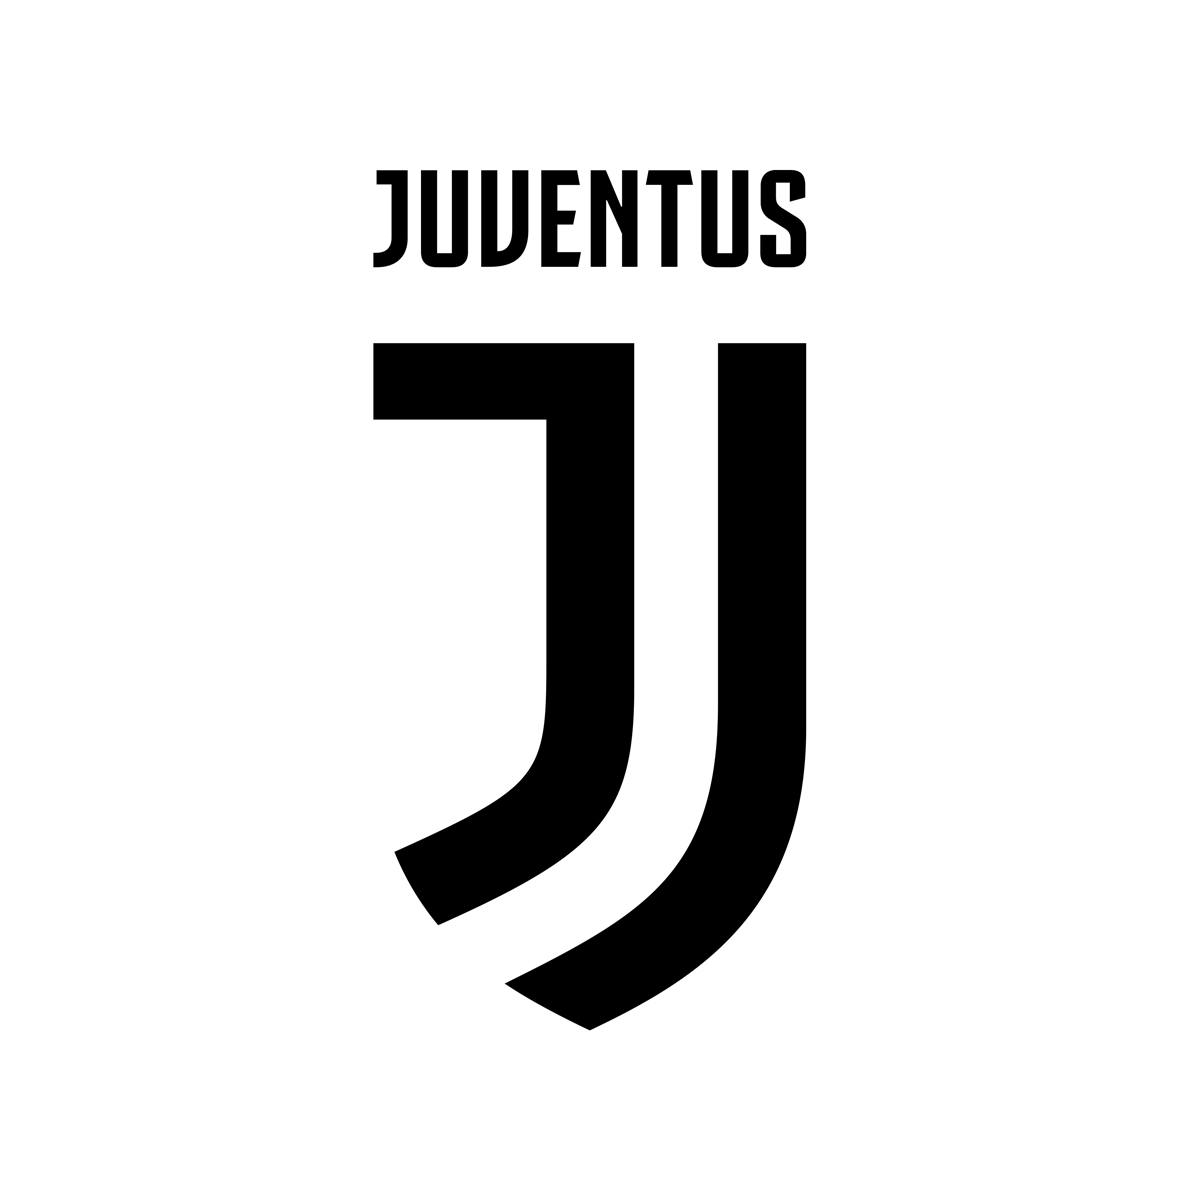 Juventus Launch New Logo To Go Beyond Football Will It Take Them There Creative Review